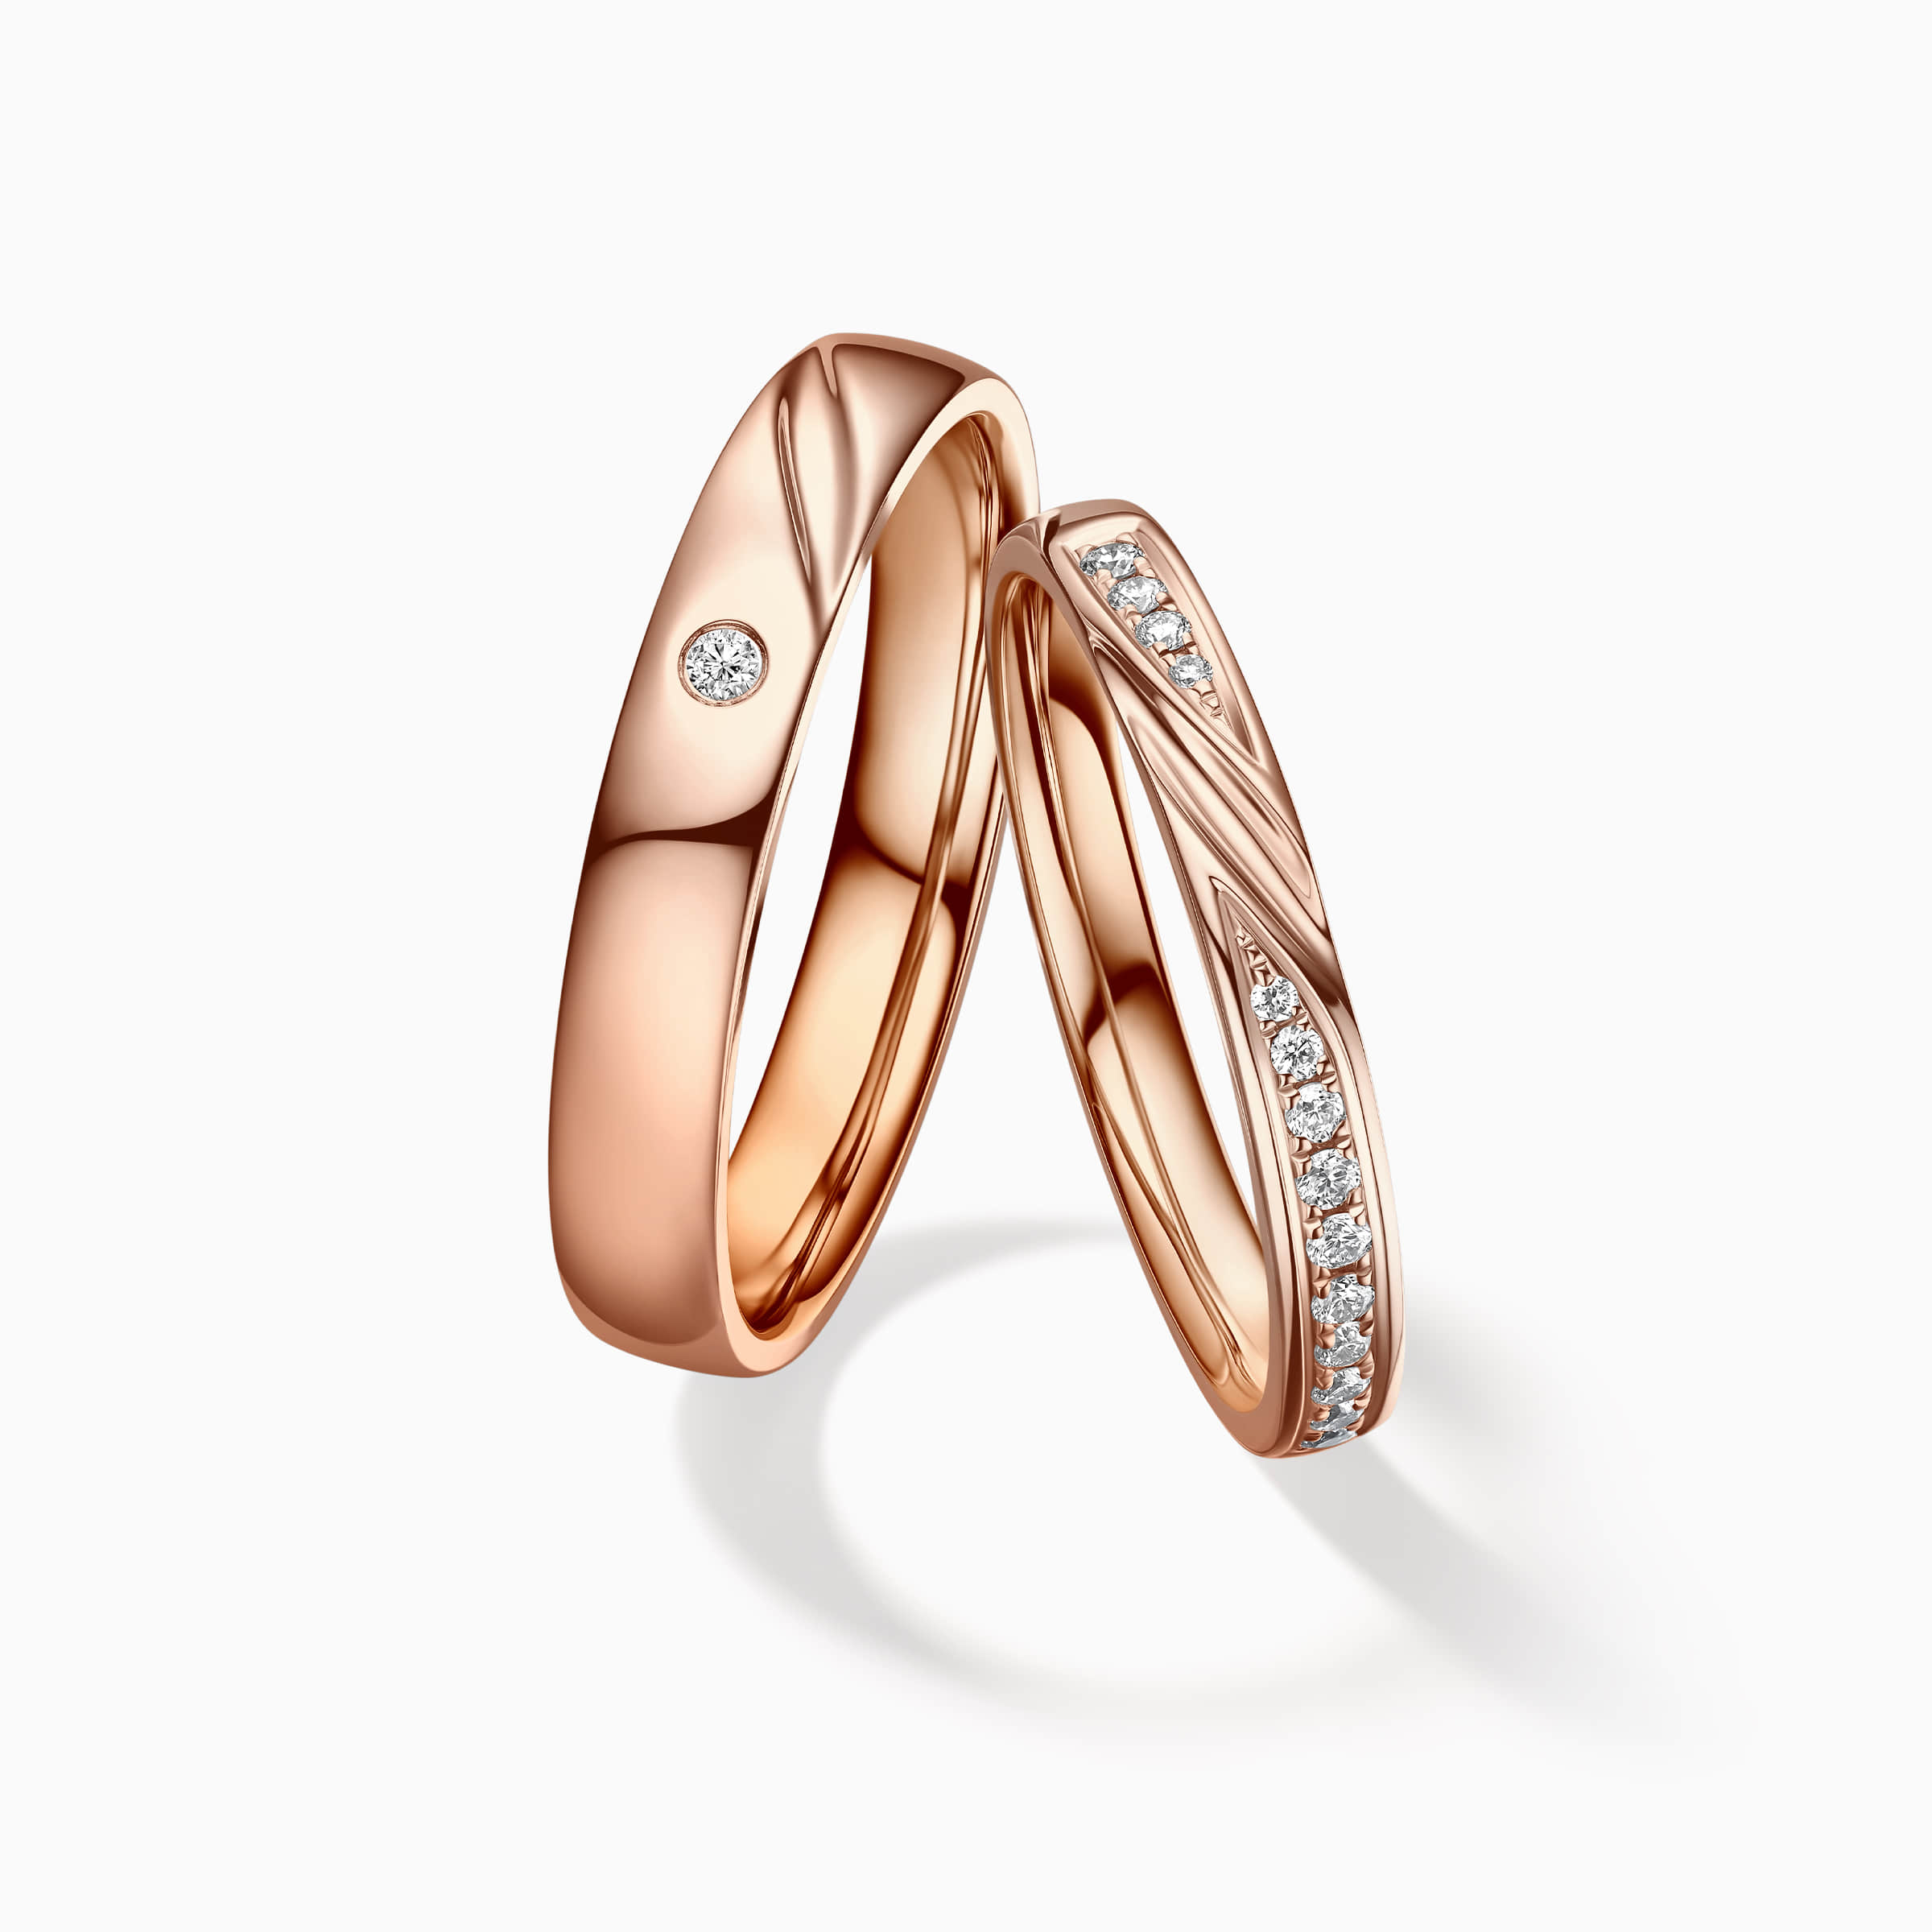 Darry Ring unique wedding ring sets in rose gold